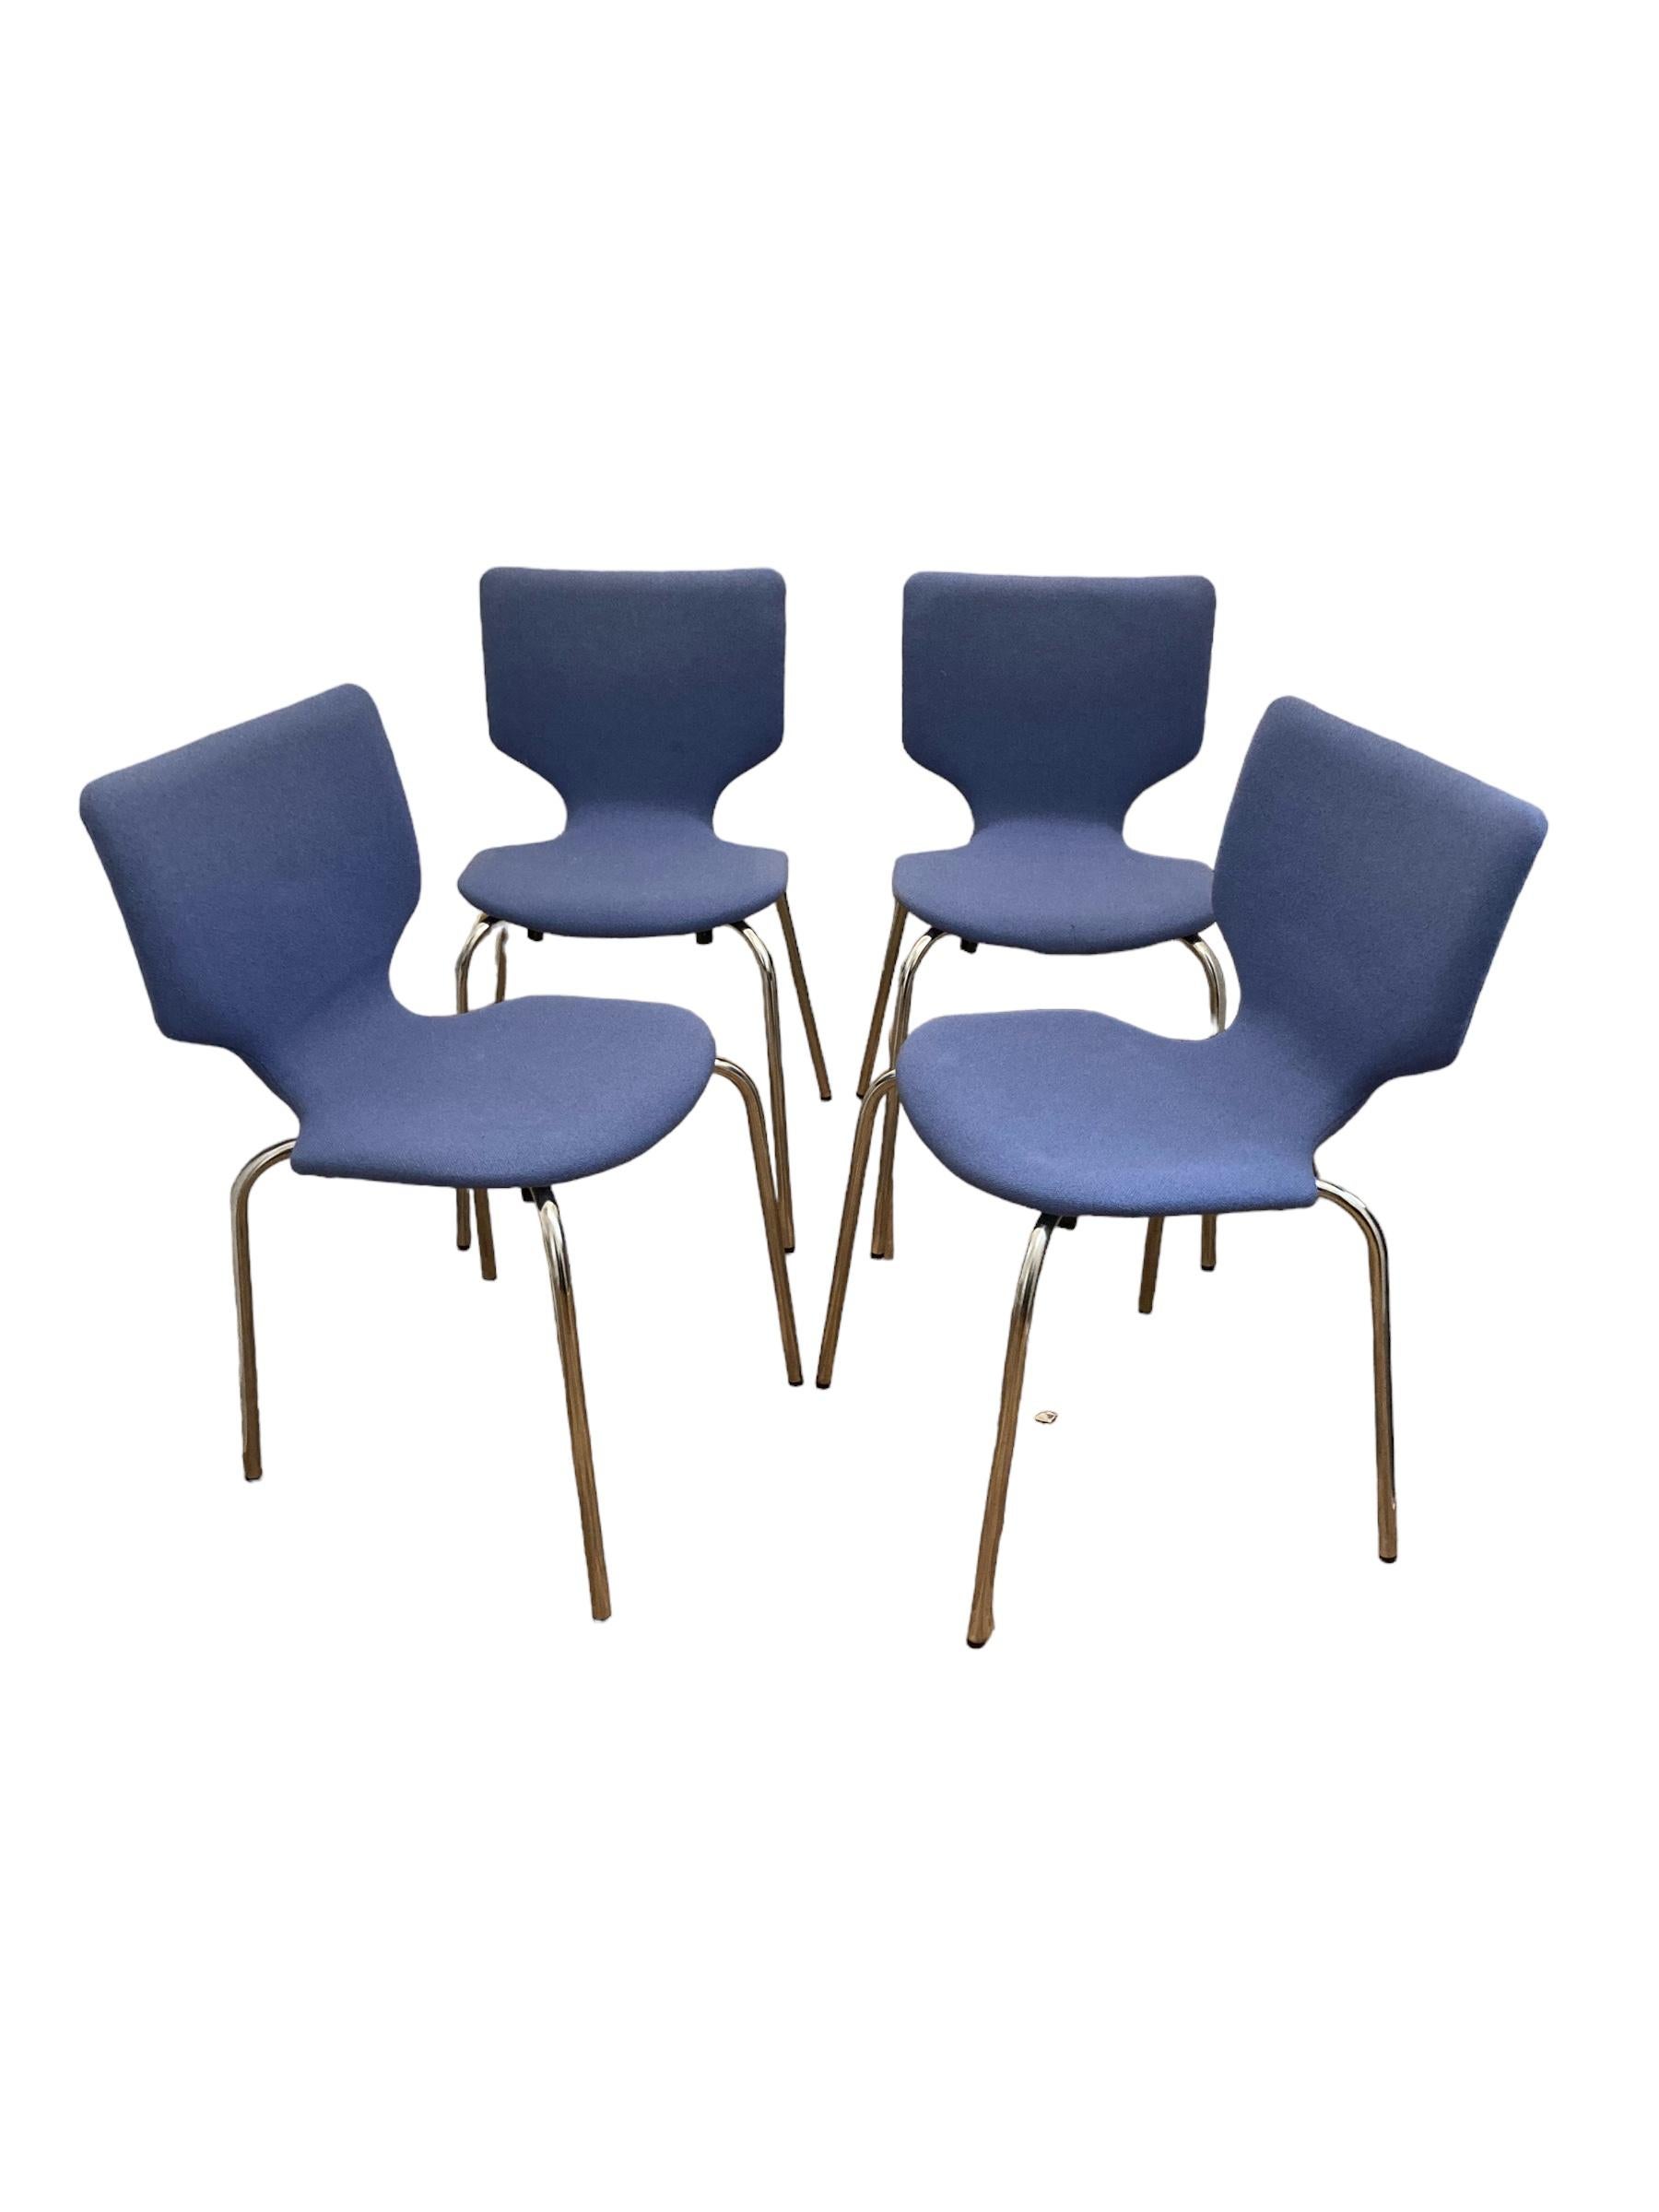 Set of four Mid Century Style Danish Duba Mobelindustri Conference Chairs (1995) In Good Condition For Sale In Bishop's Stortford, GB